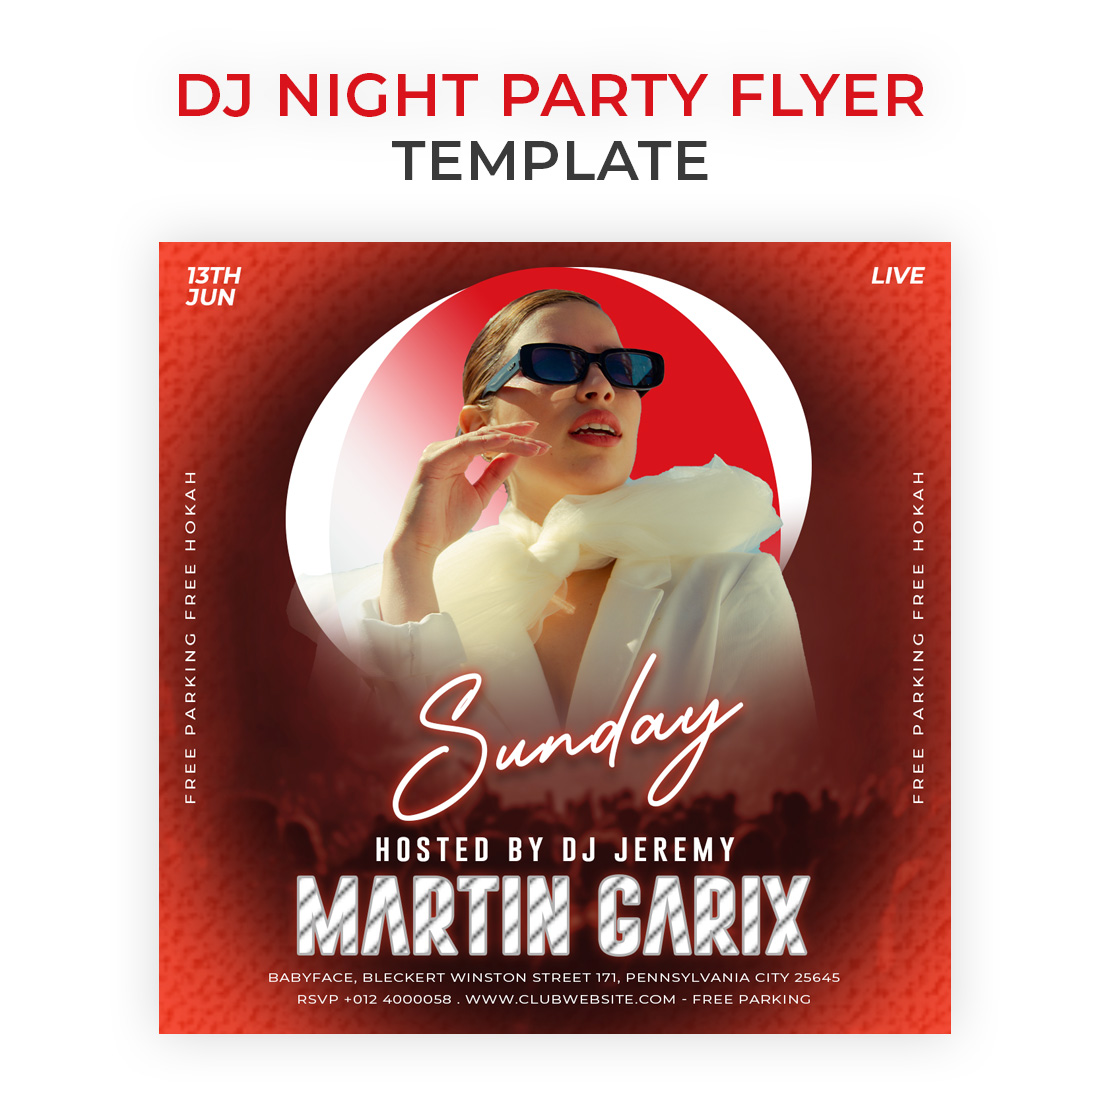 DJ Night Party Flyer Photoshop Template PSD preview image.